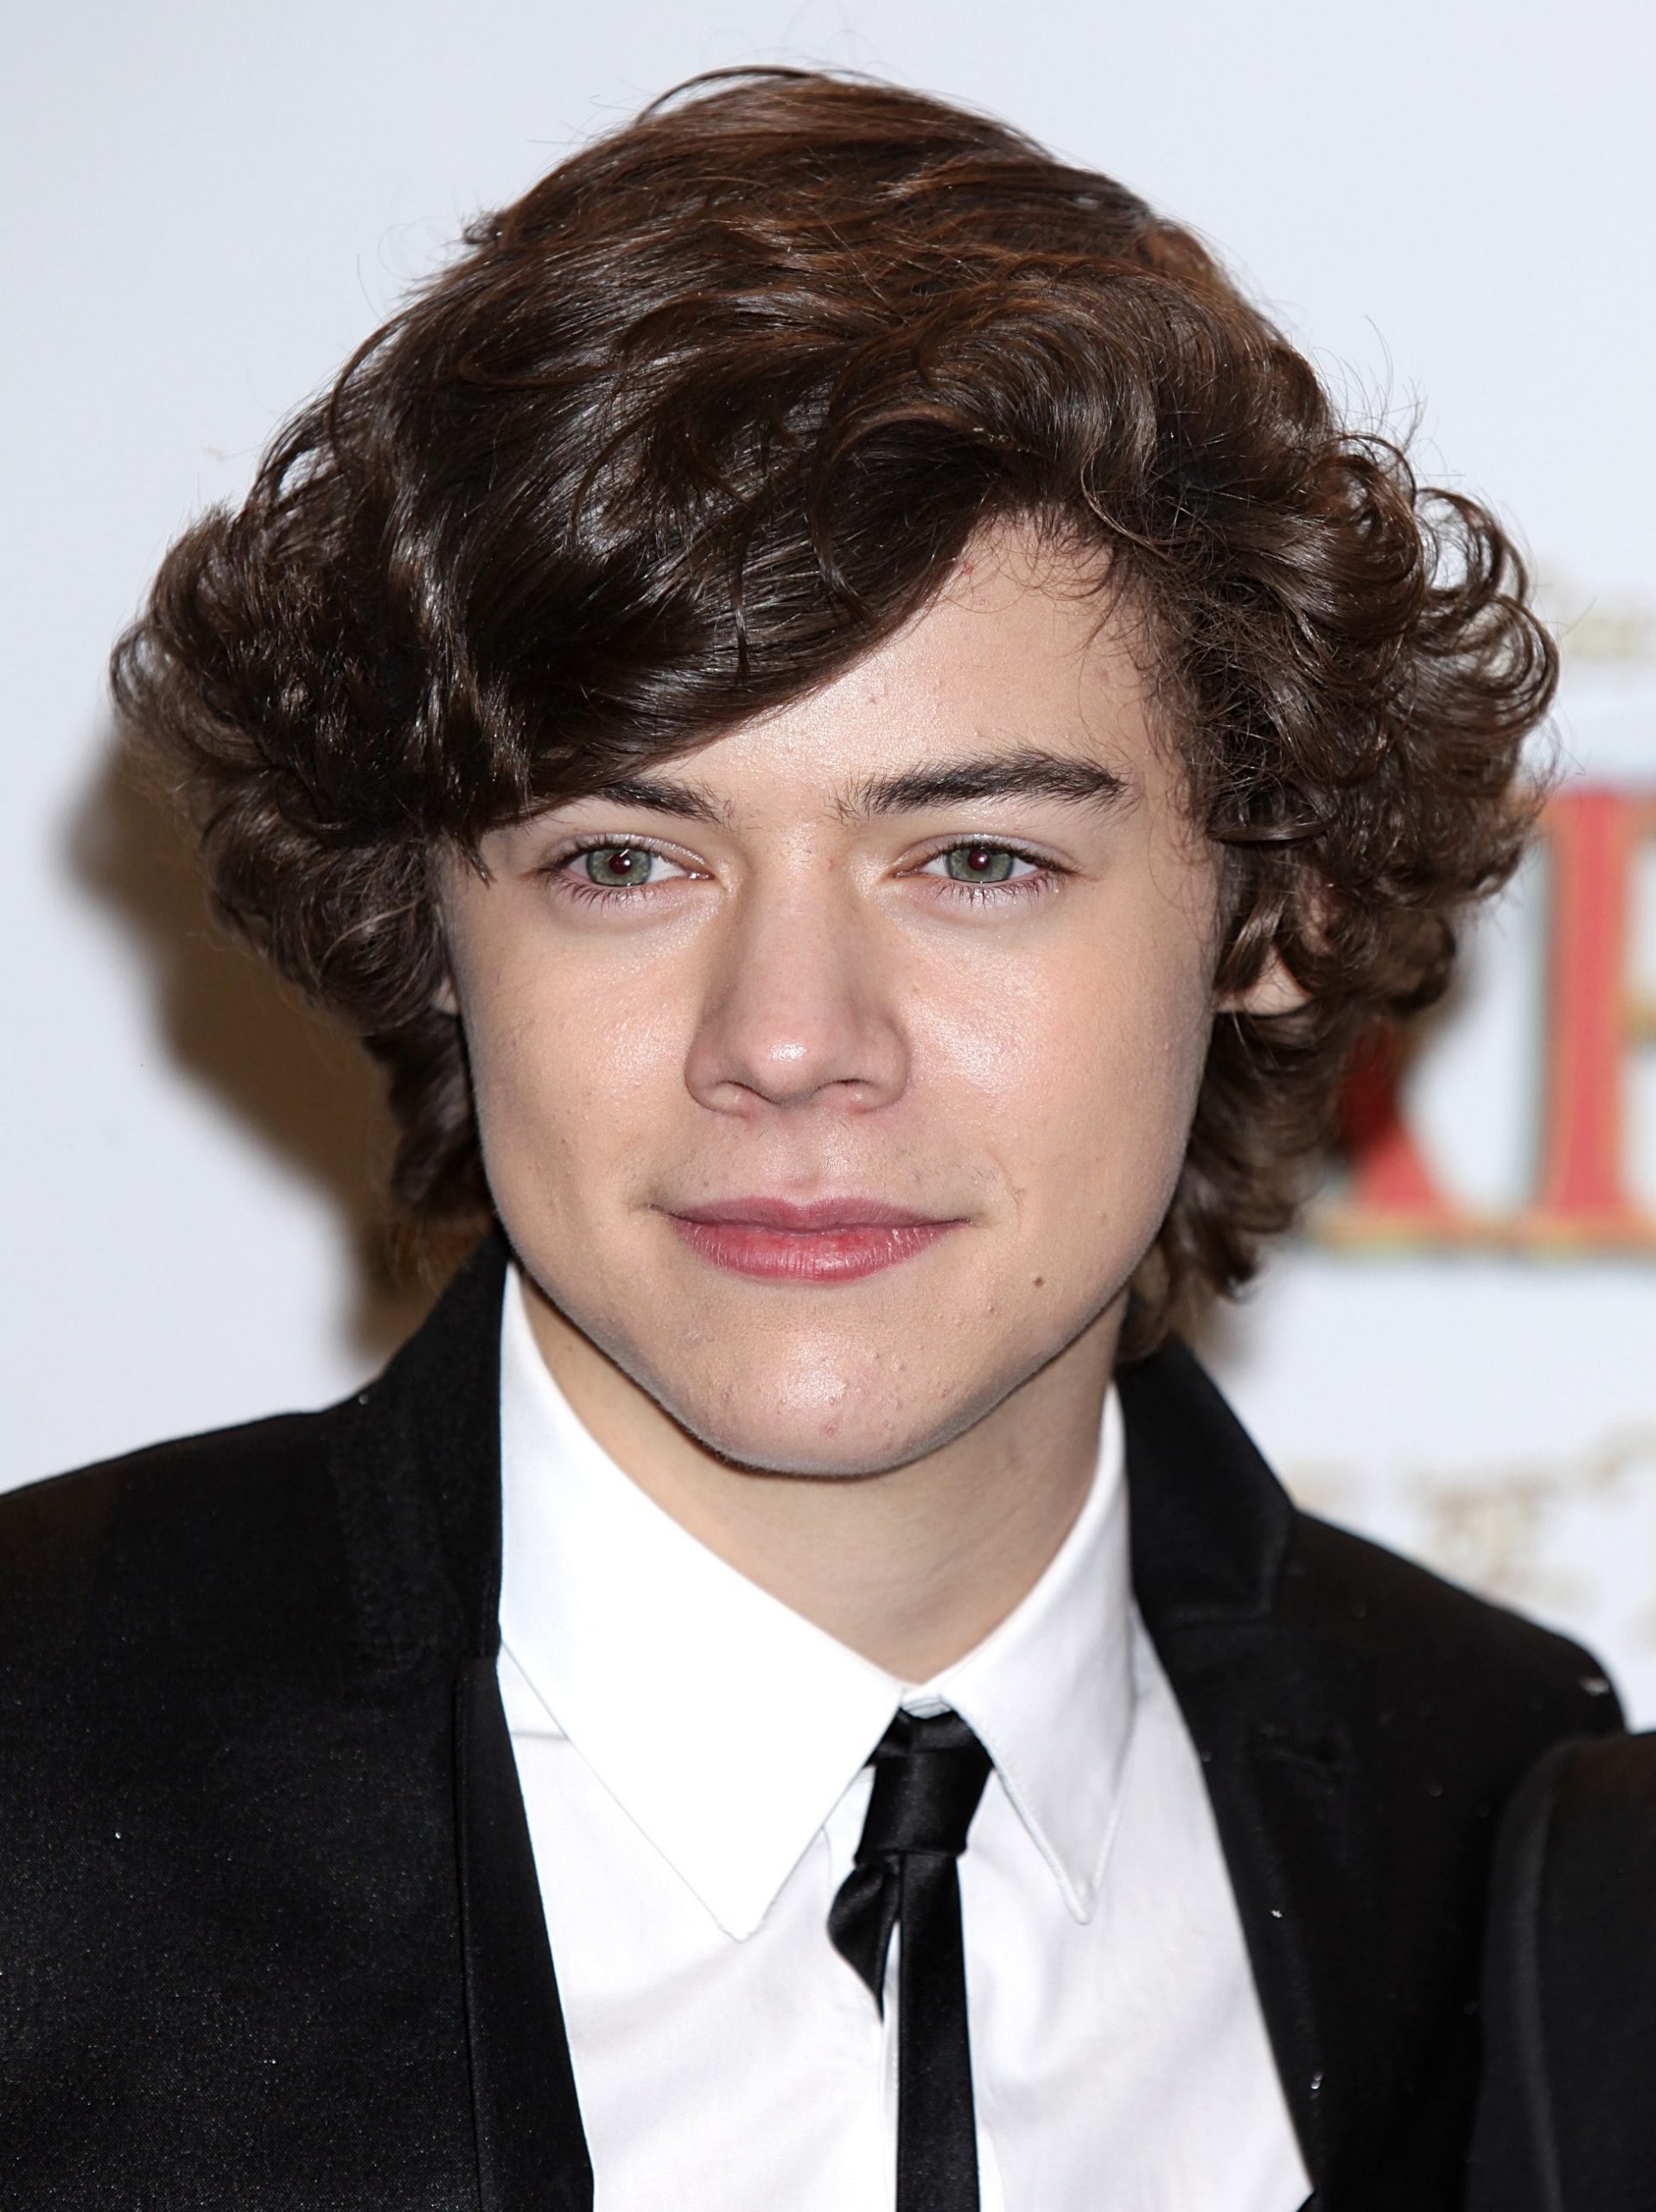 Did Harry Styles Have One of the Most Precious Glow-Ups Ever? It Would Appear So